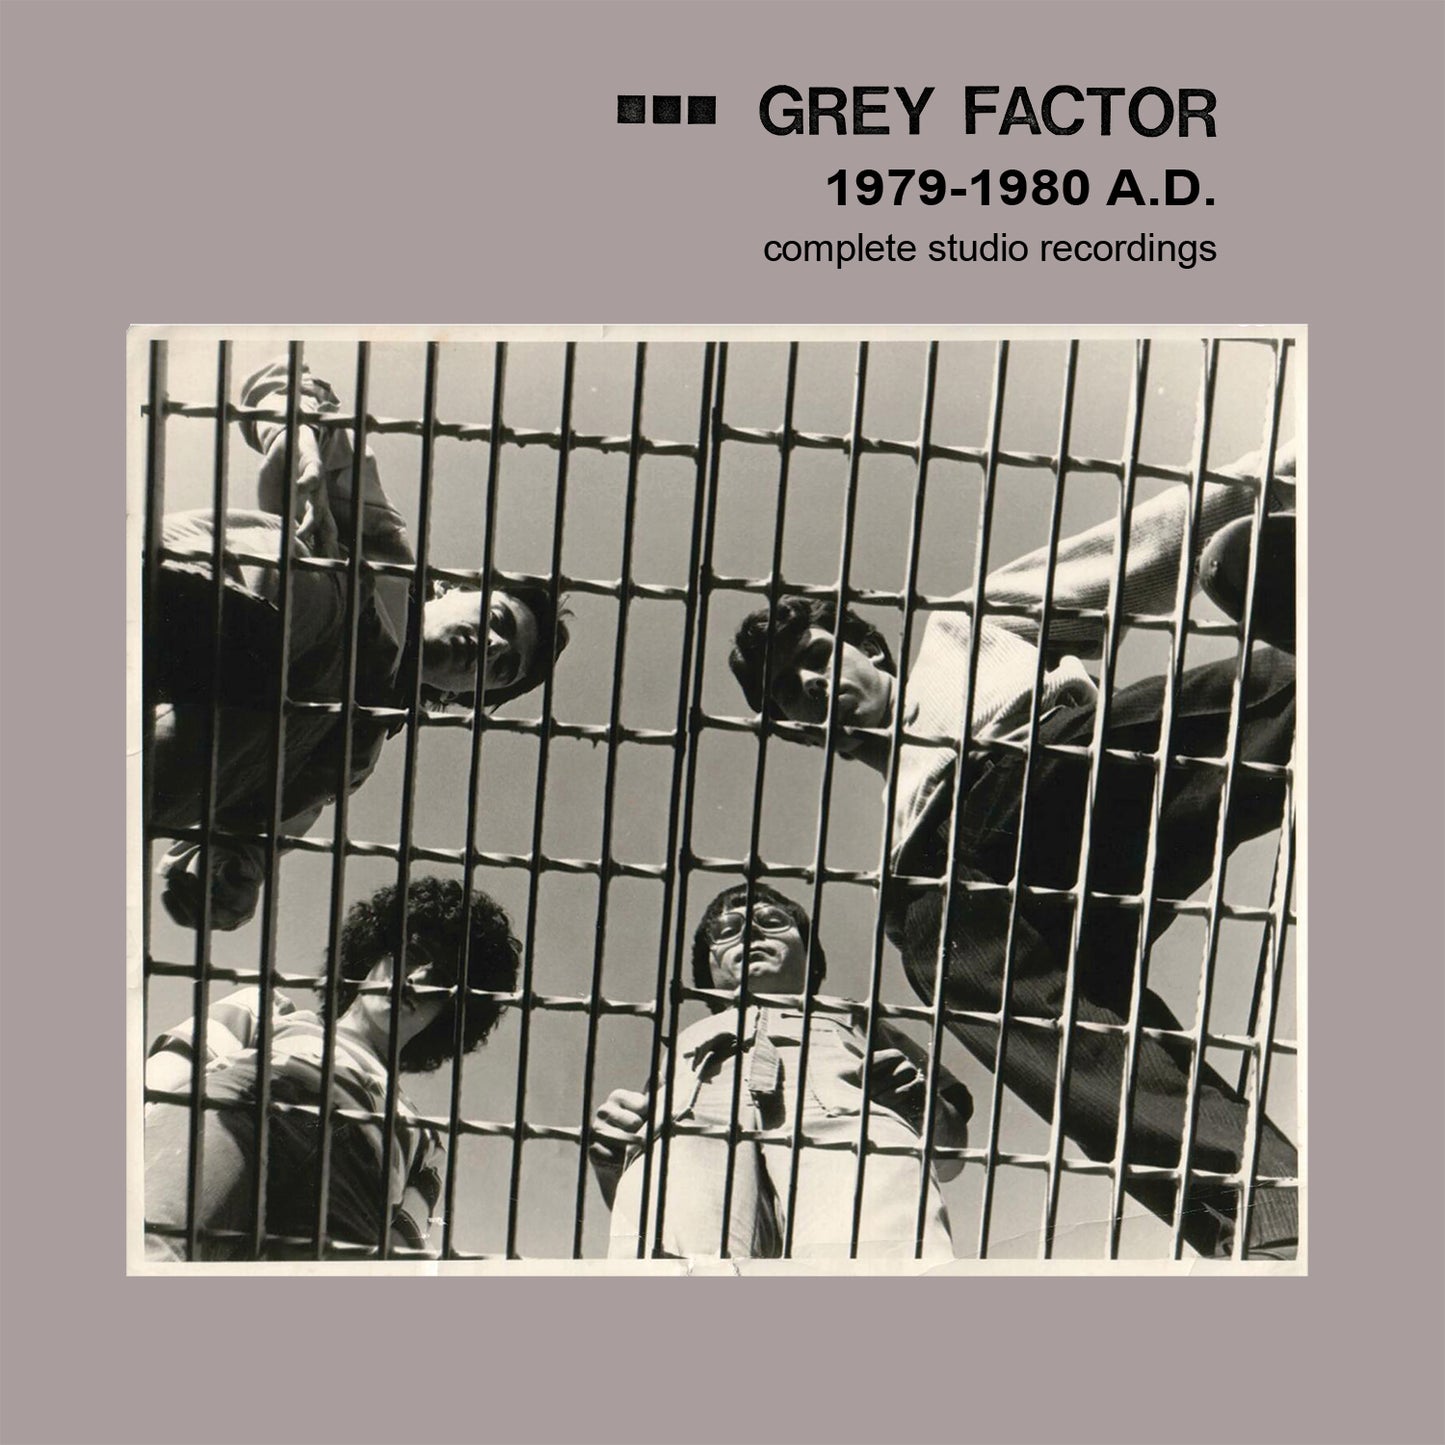 Grey Factor - 1979 to 1980 A.D. (Complete Studio Recordings)